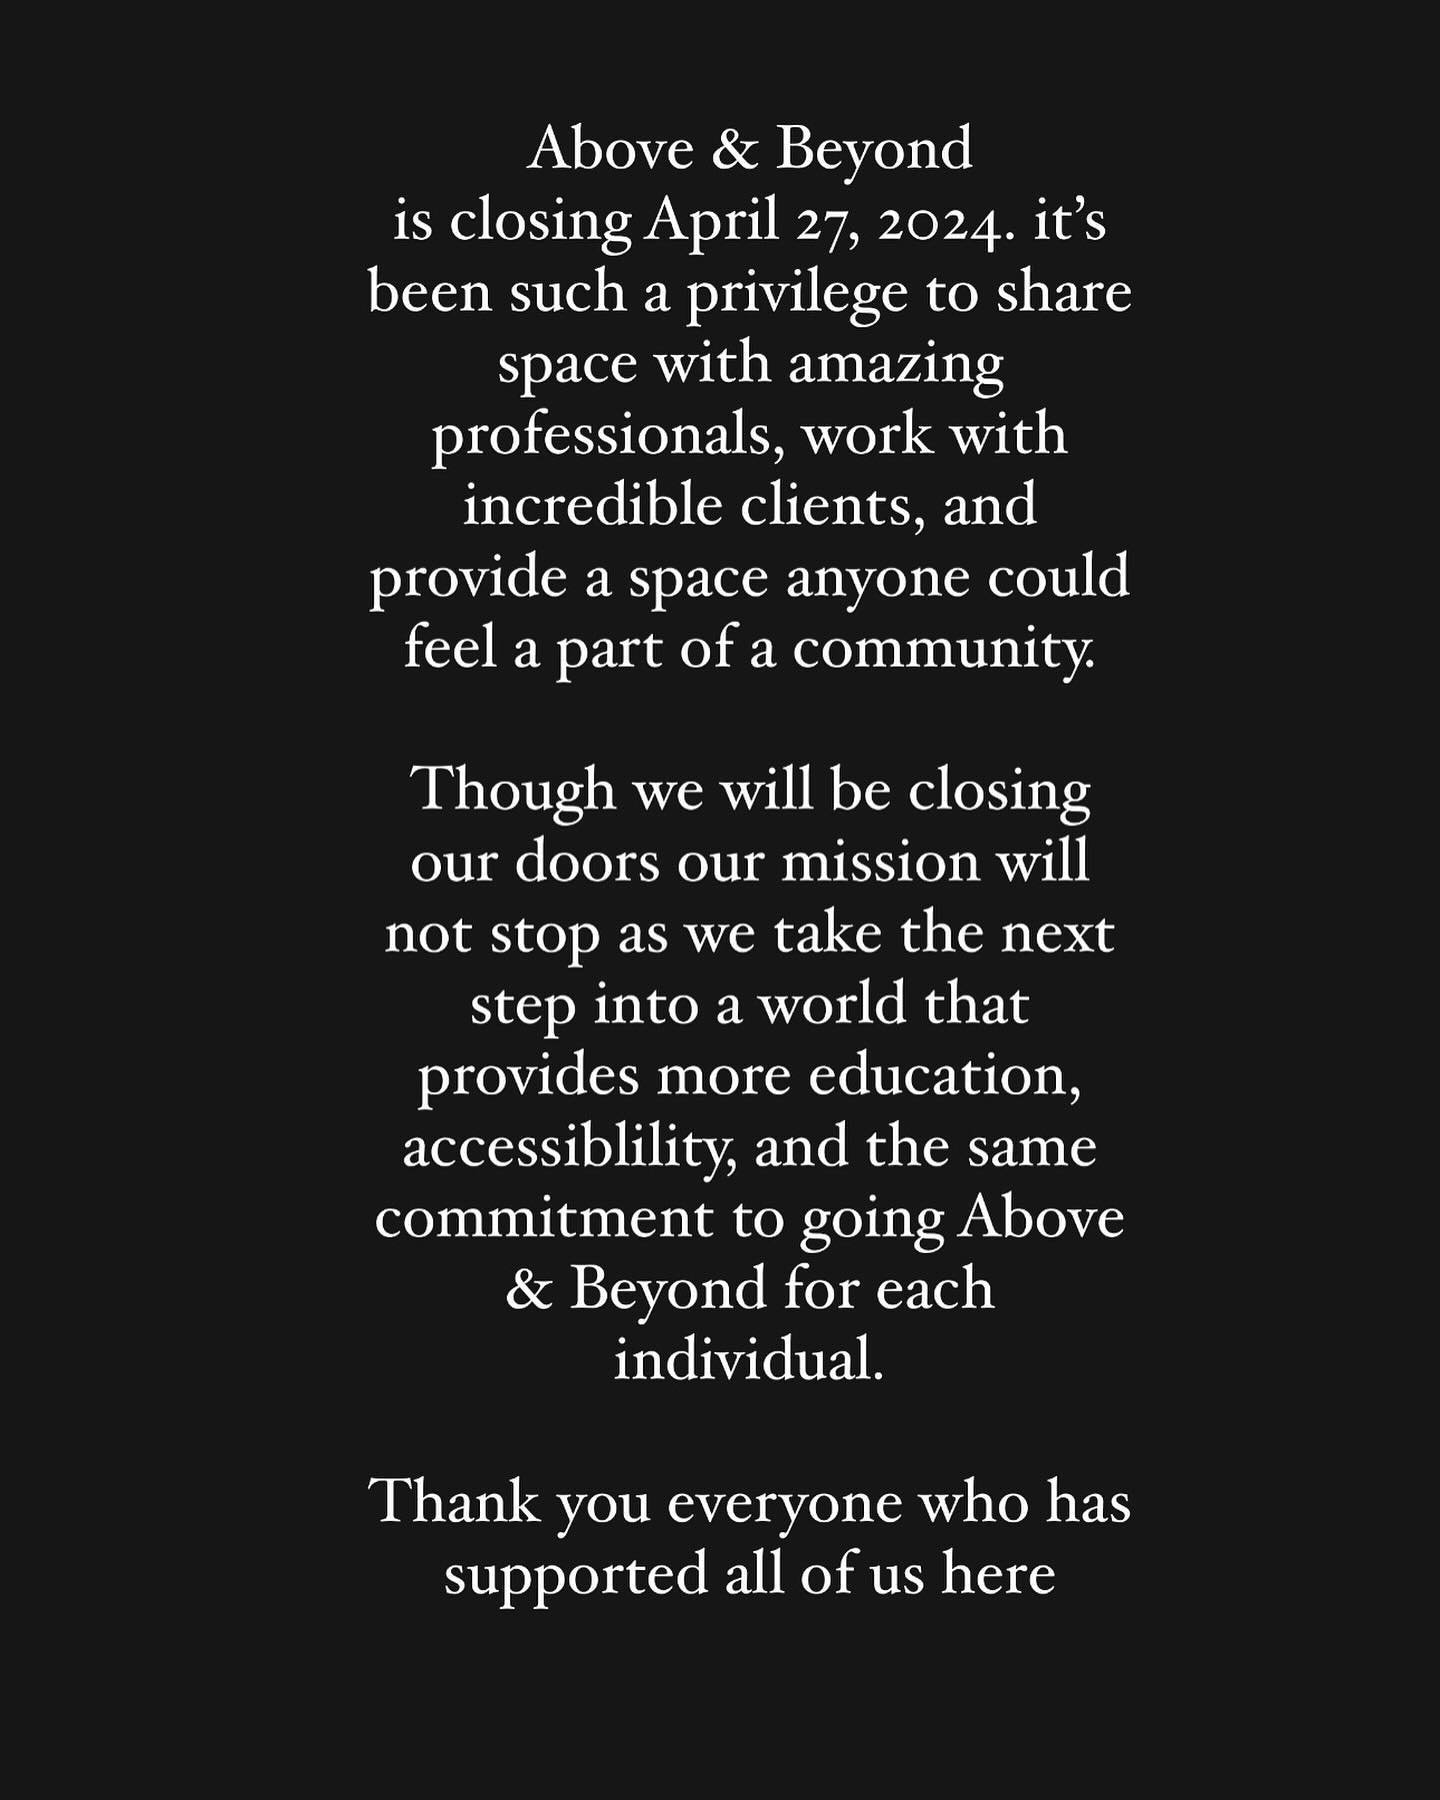 Above &amp; Beyond
Is closing April 27, 2024. It&rsquo;s been such a privilege to share space with amazing professionals, work with incredible clients, and provide a space anyone could feel a part of a community.

Though we will be closing our doors 